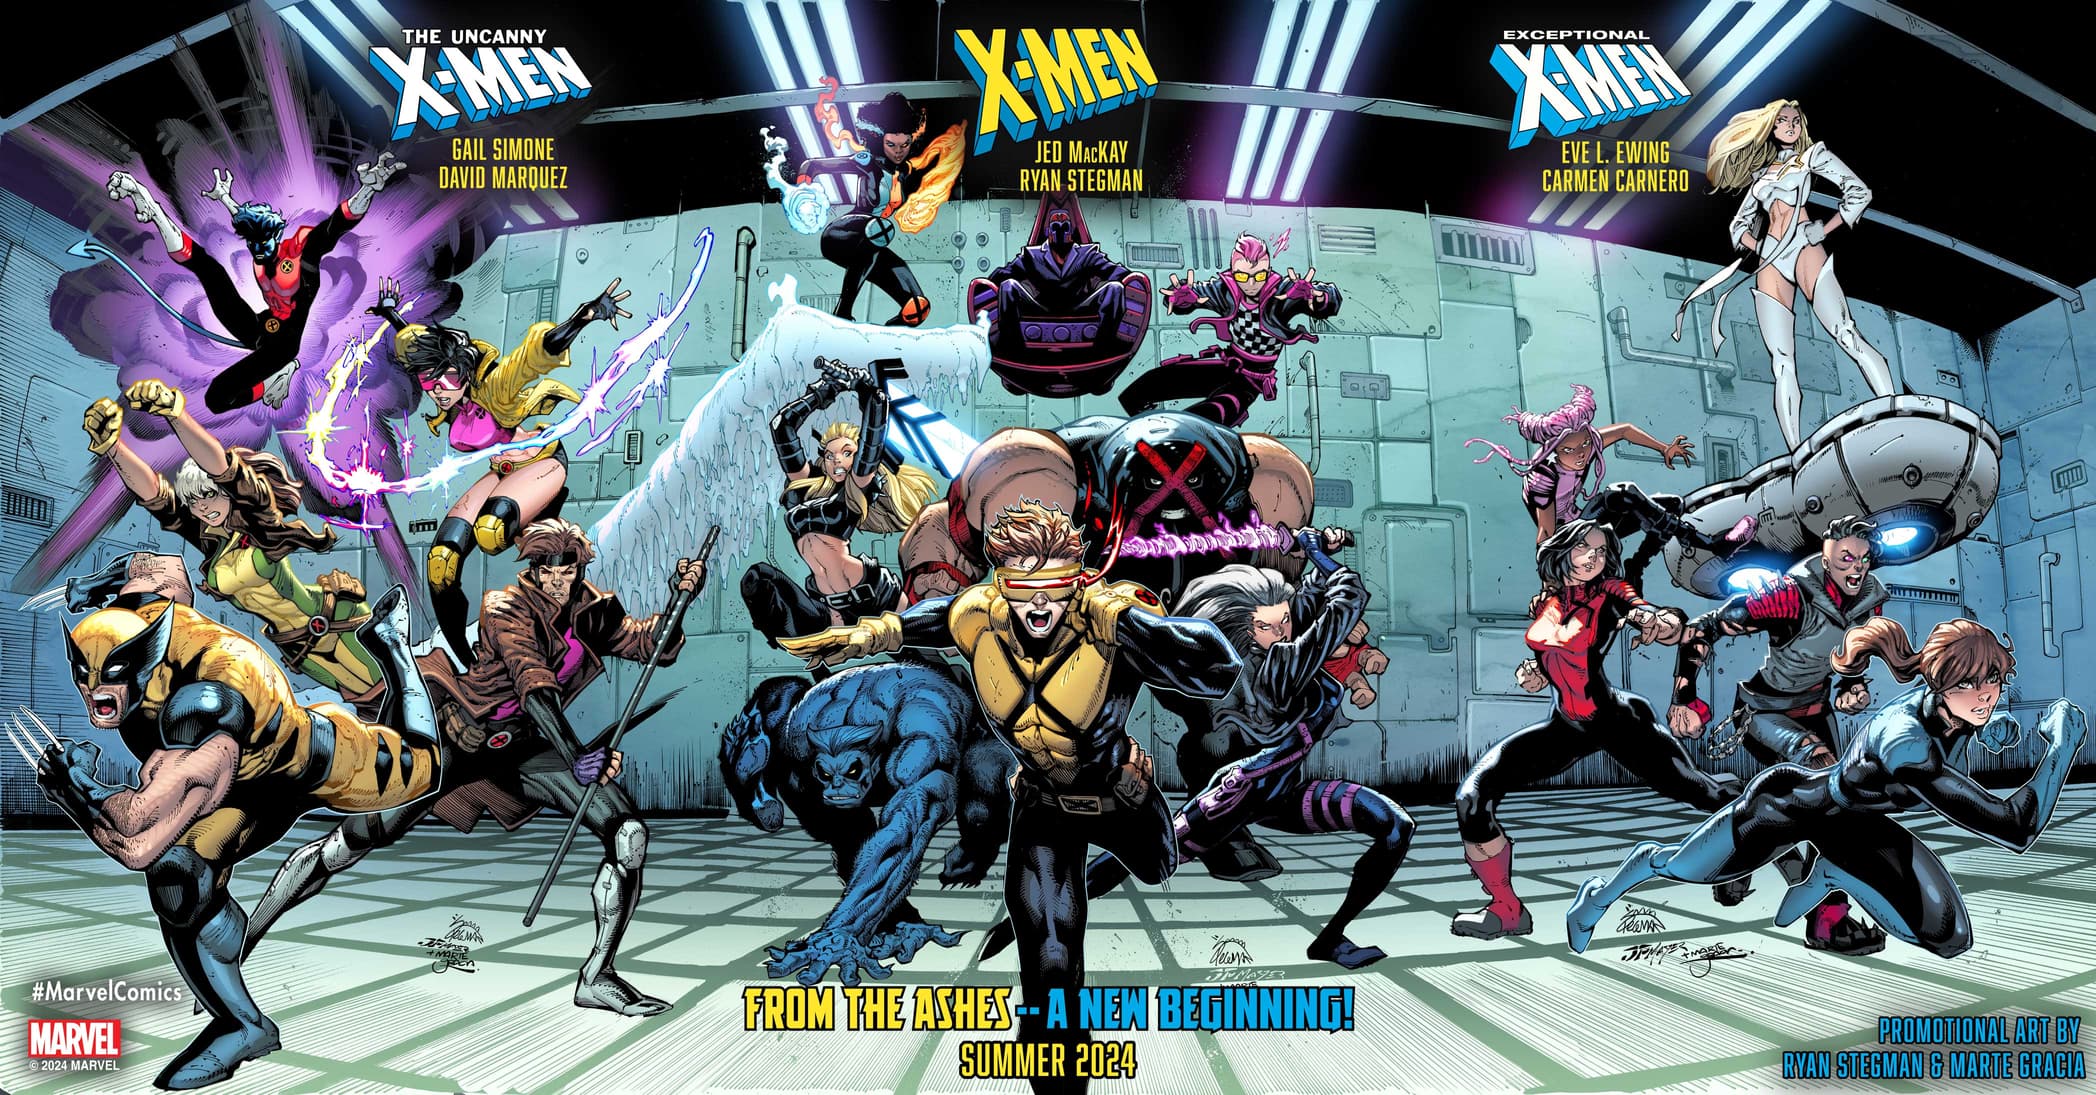 X-Men: From the Ashes flagship titles